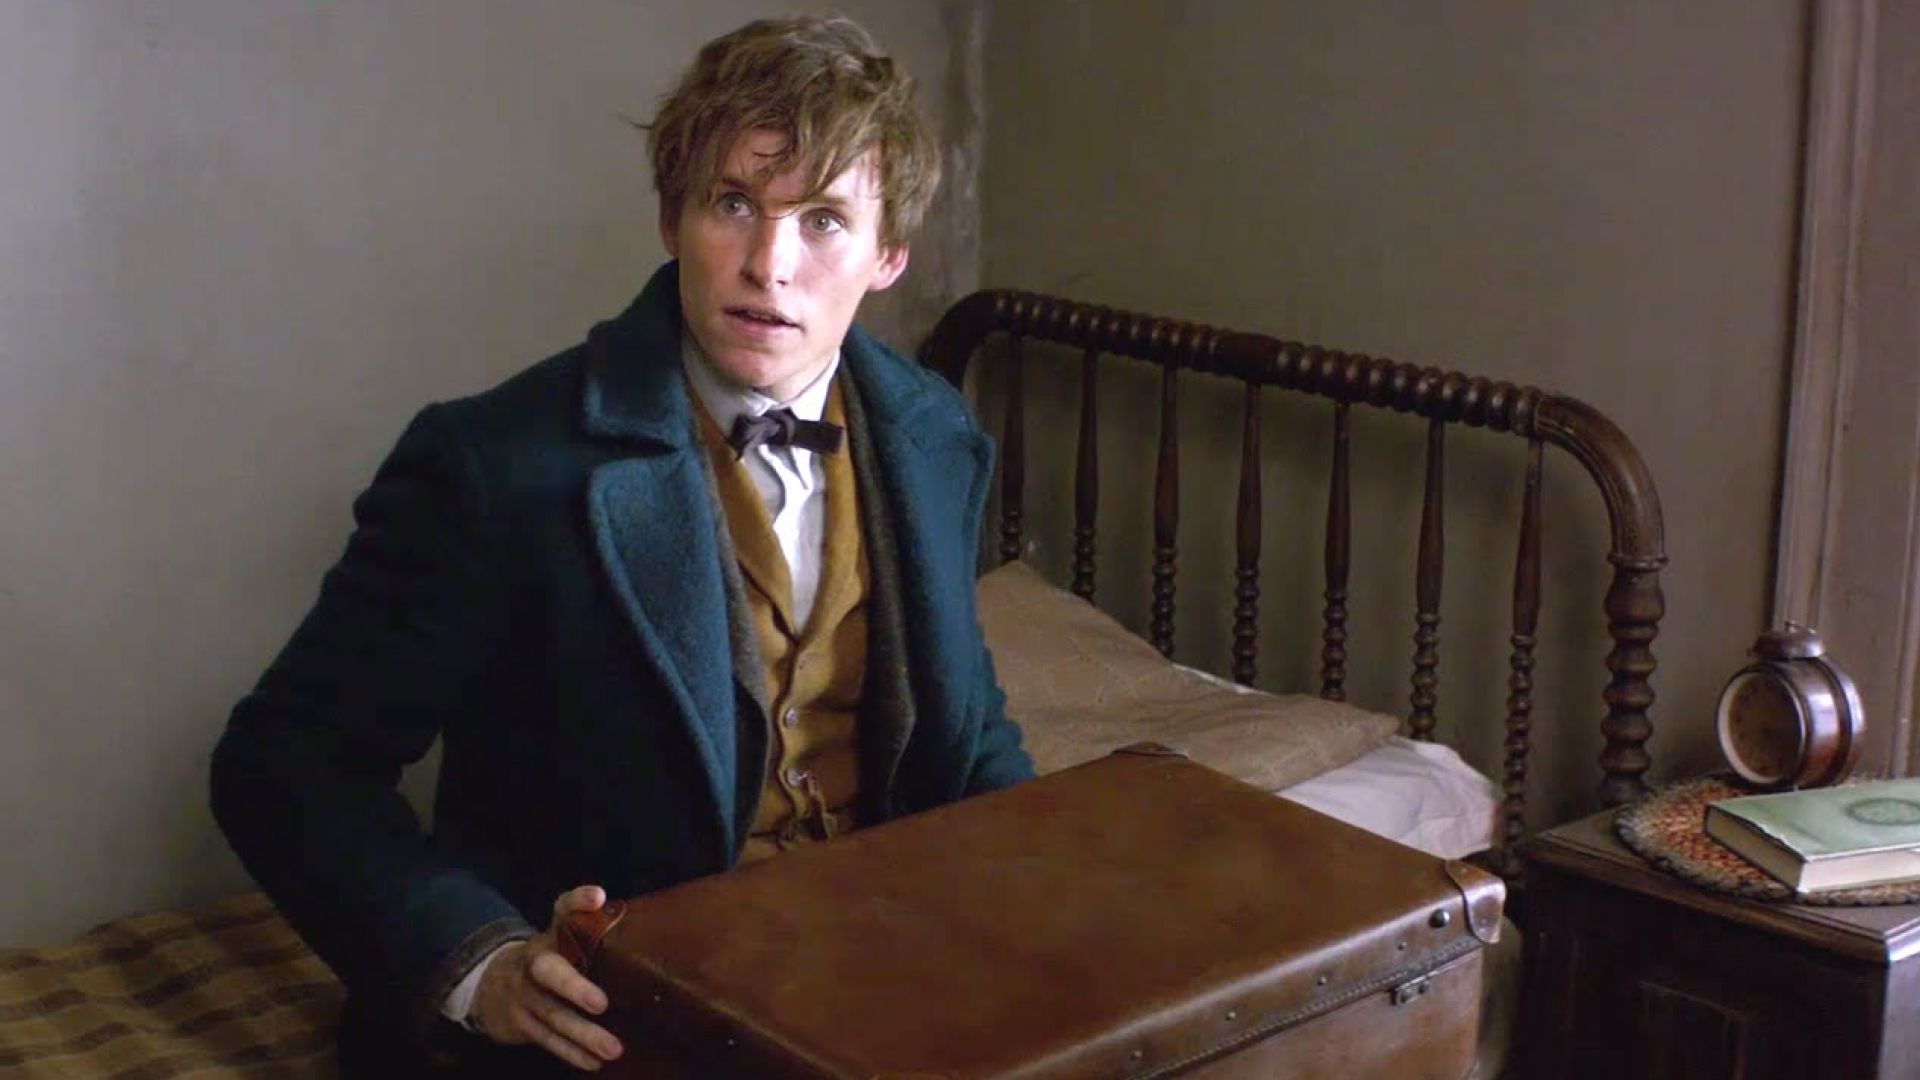 Fantastic Beasts And Where To Find Them - Trailer #1